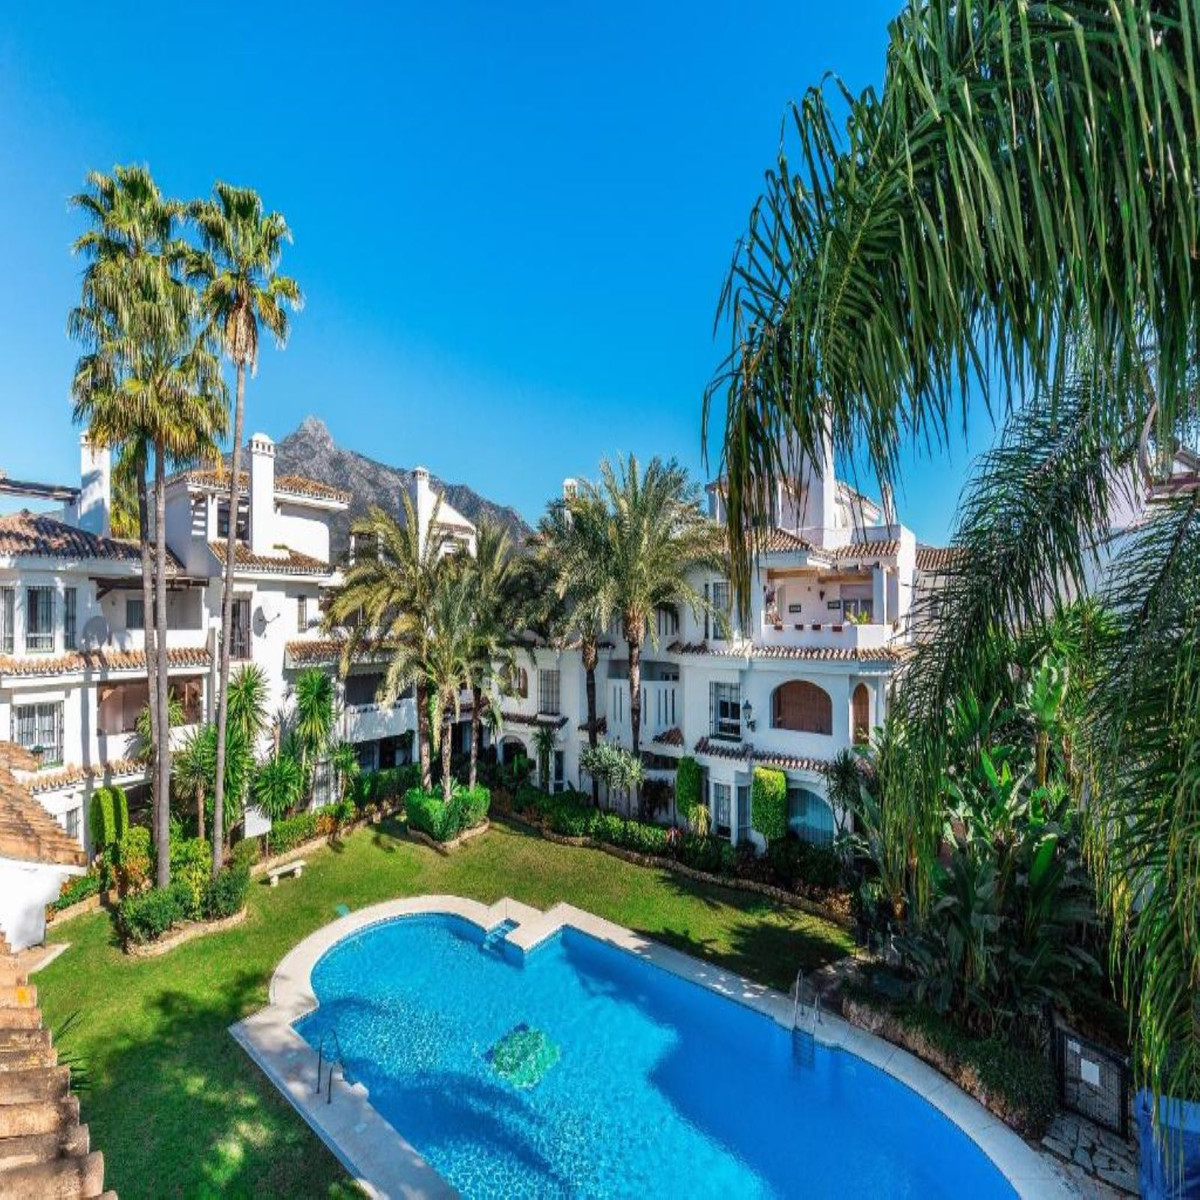 Excellent opportunity to purchase a property in one of the most sought after developments in the are, Spain